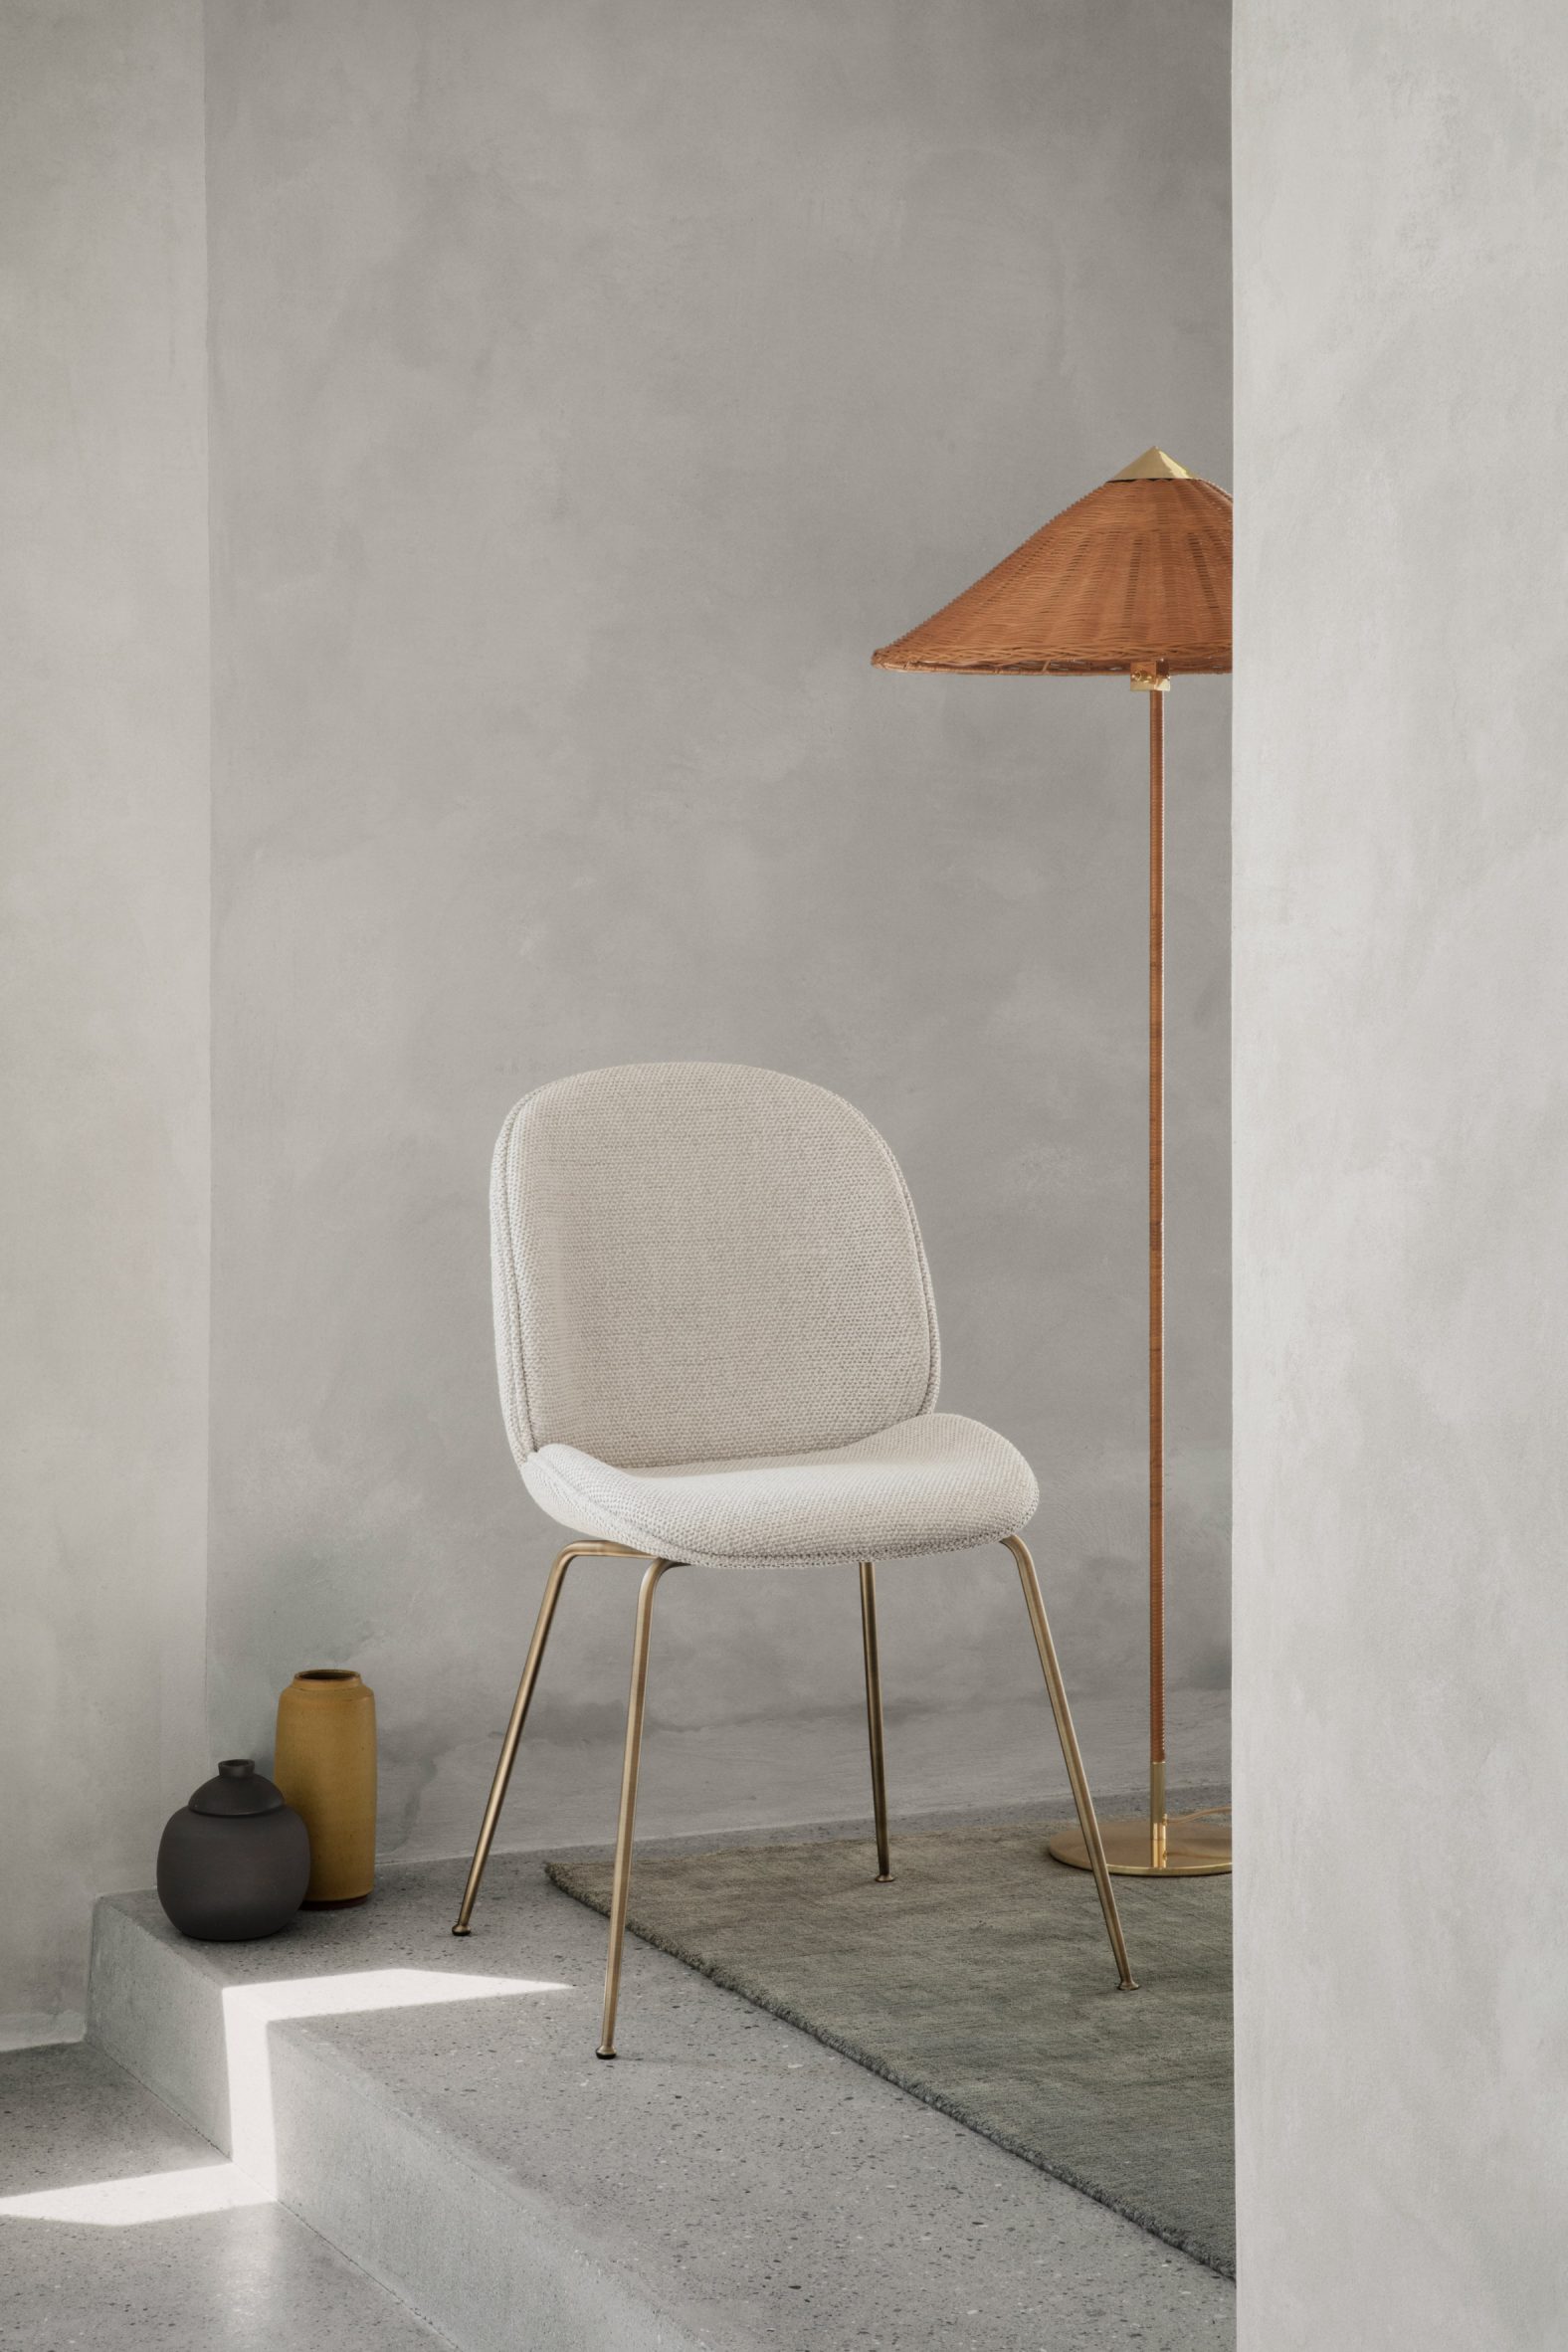 Off-white dining chair by GamFratesi